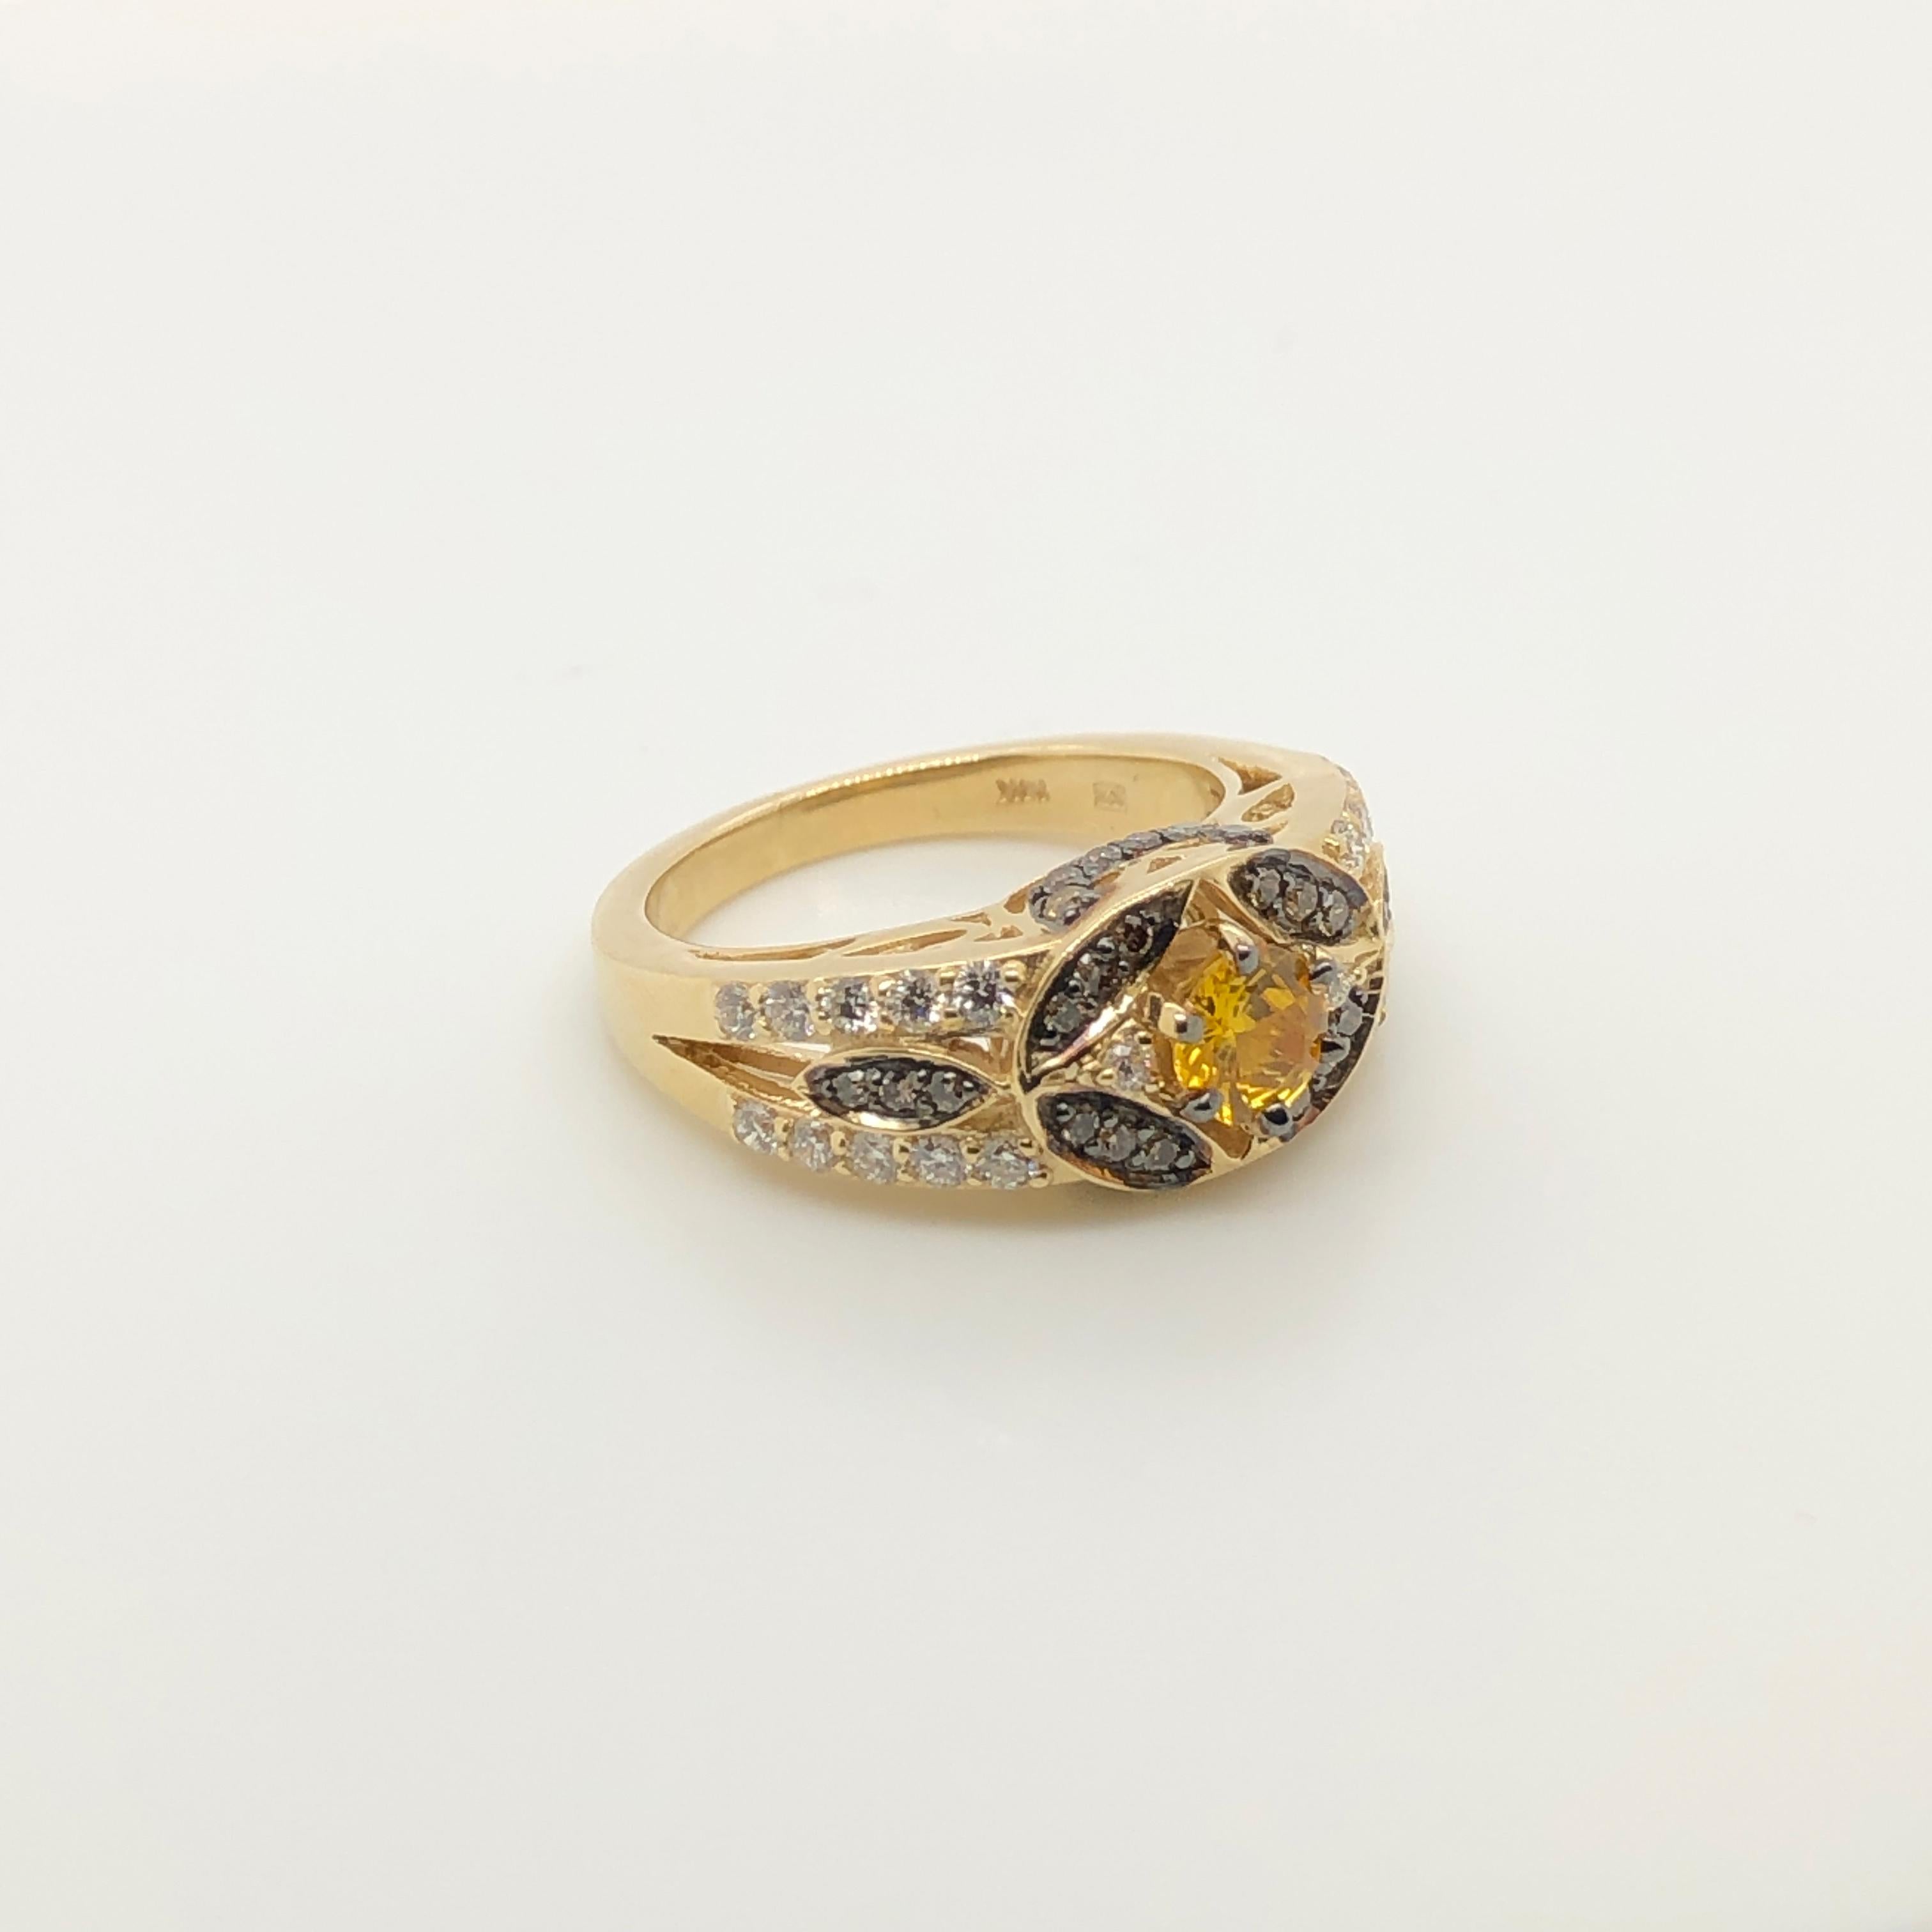 Chocolate Diamonds (1/3 ct t.w.) and Vanilla Diamonds (3/8 ct t.w.) provide sweet sparkle to this 14K yellow gold Le Vian ring centered with a 1/2 ct Yellow Sapphire.
Ring Size: 7